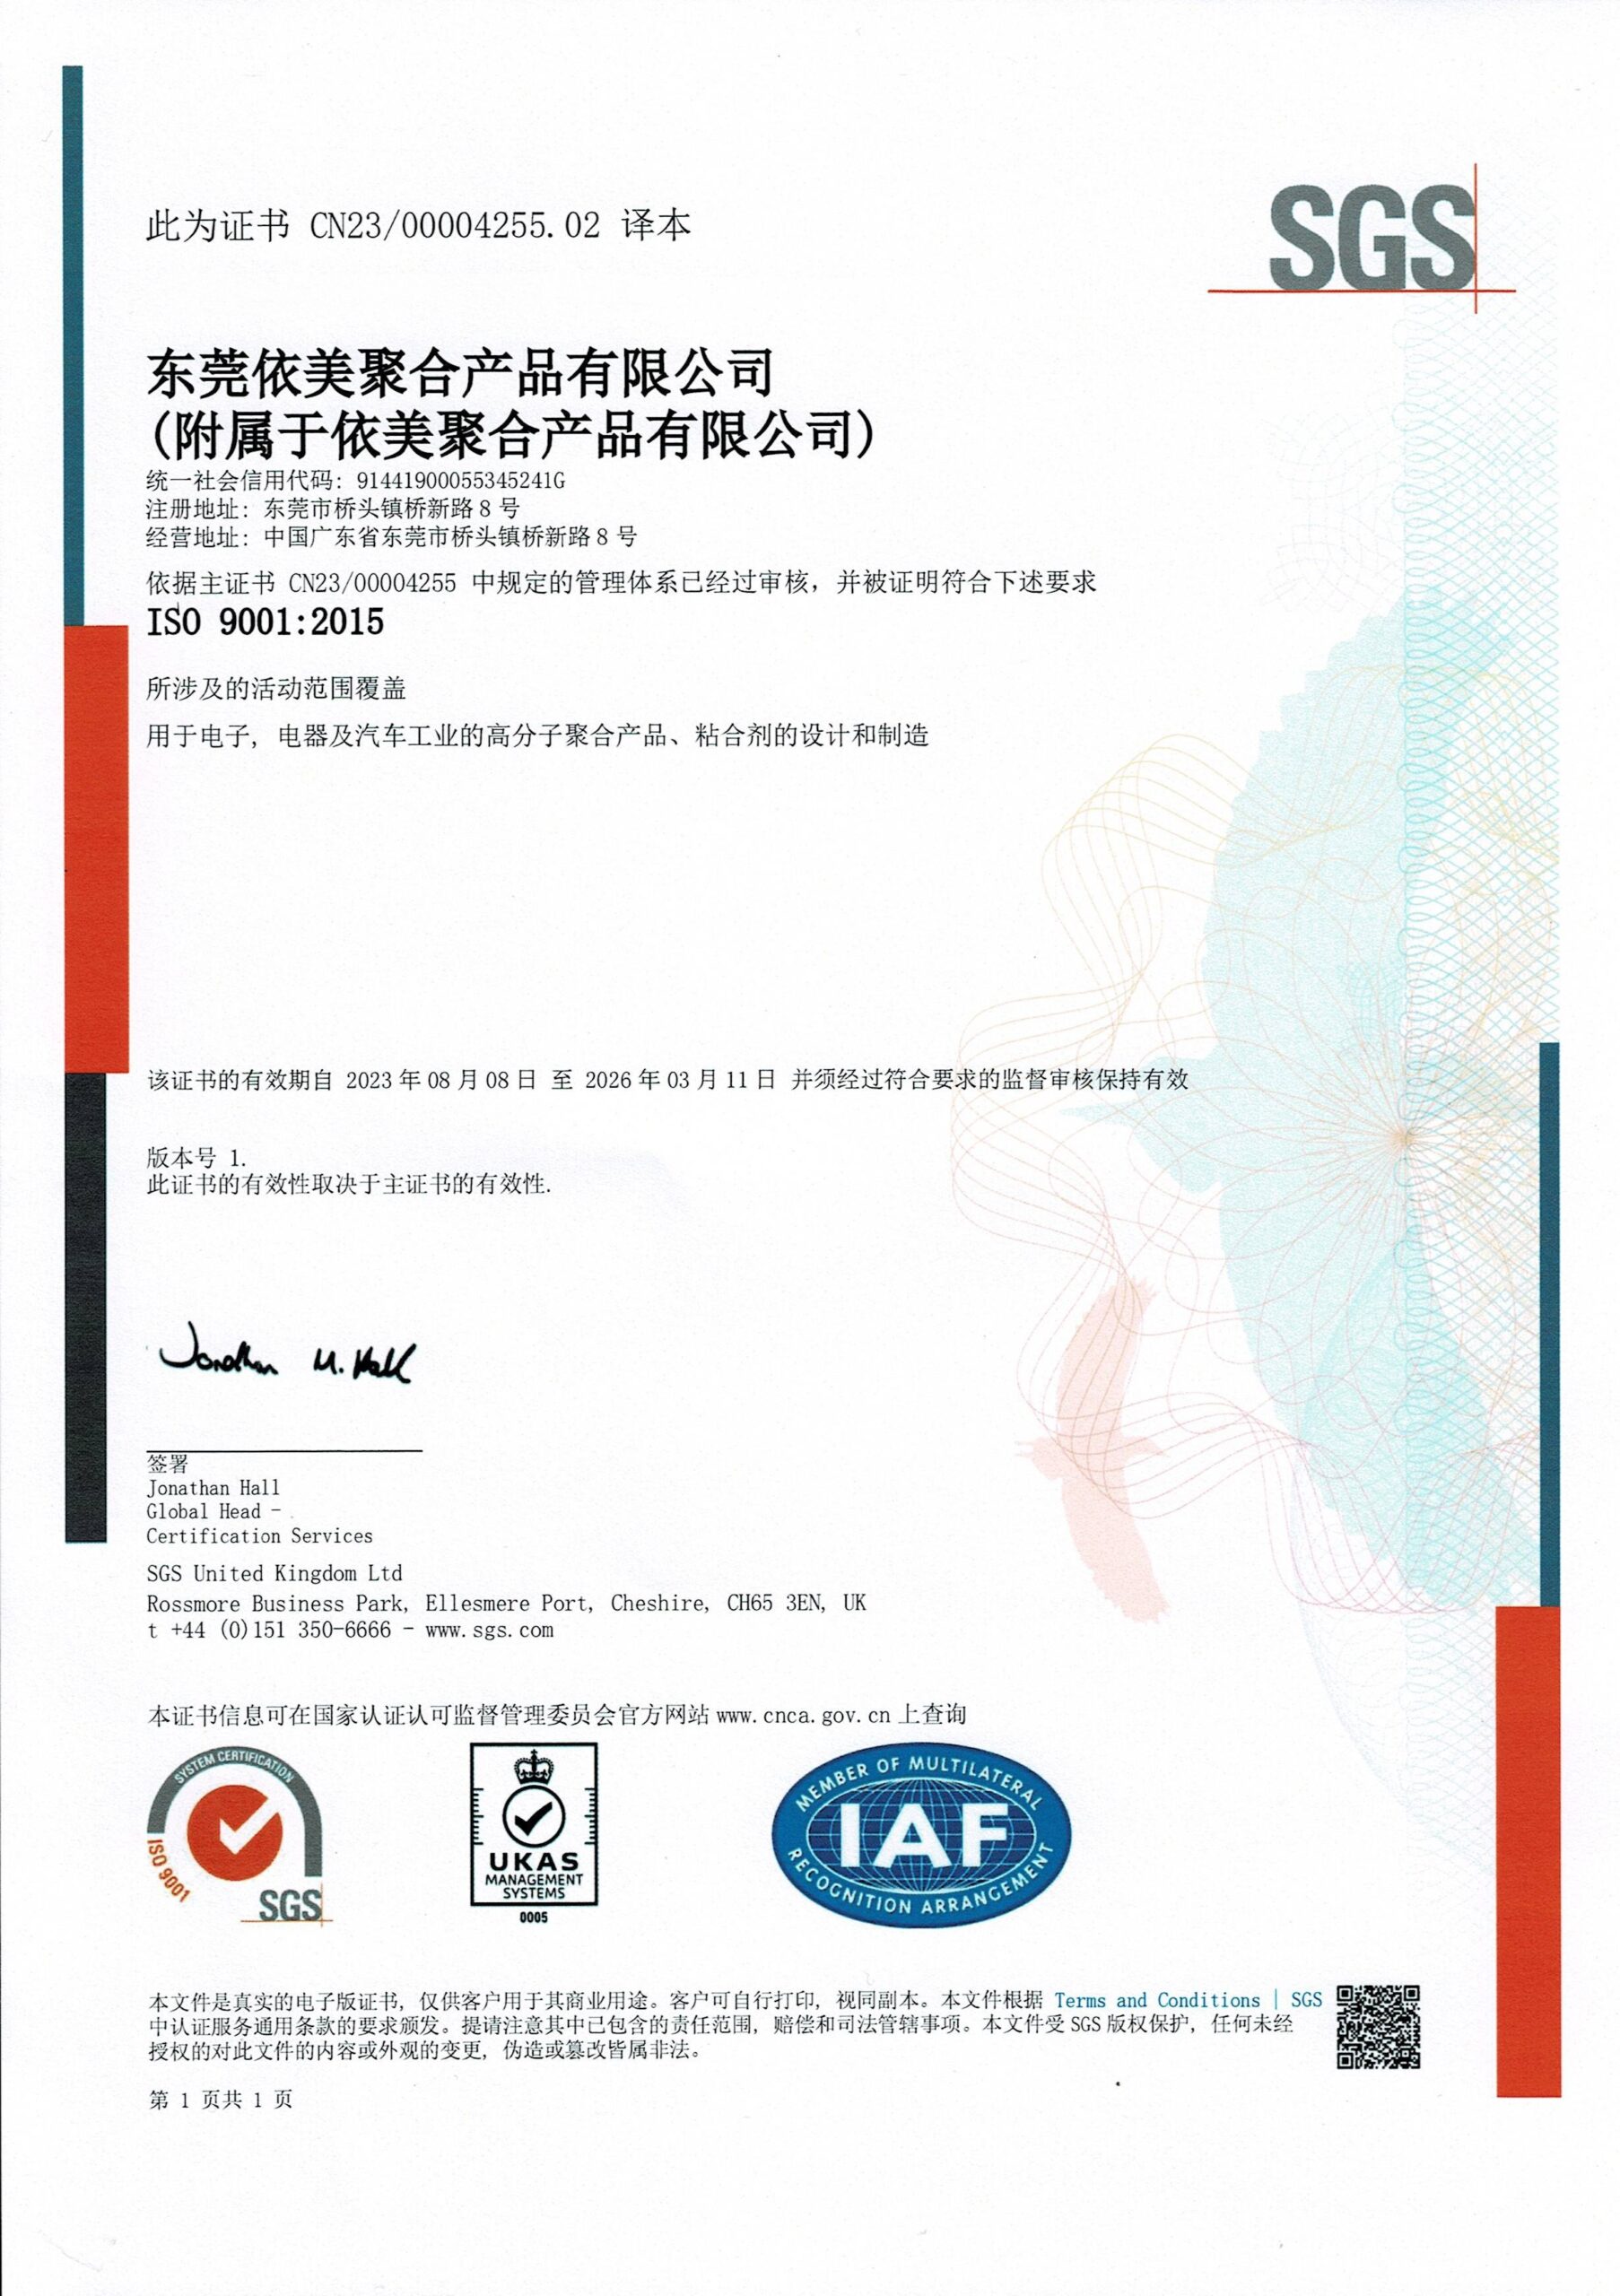 Emei Materials Systems Limited ISO 9001:2015